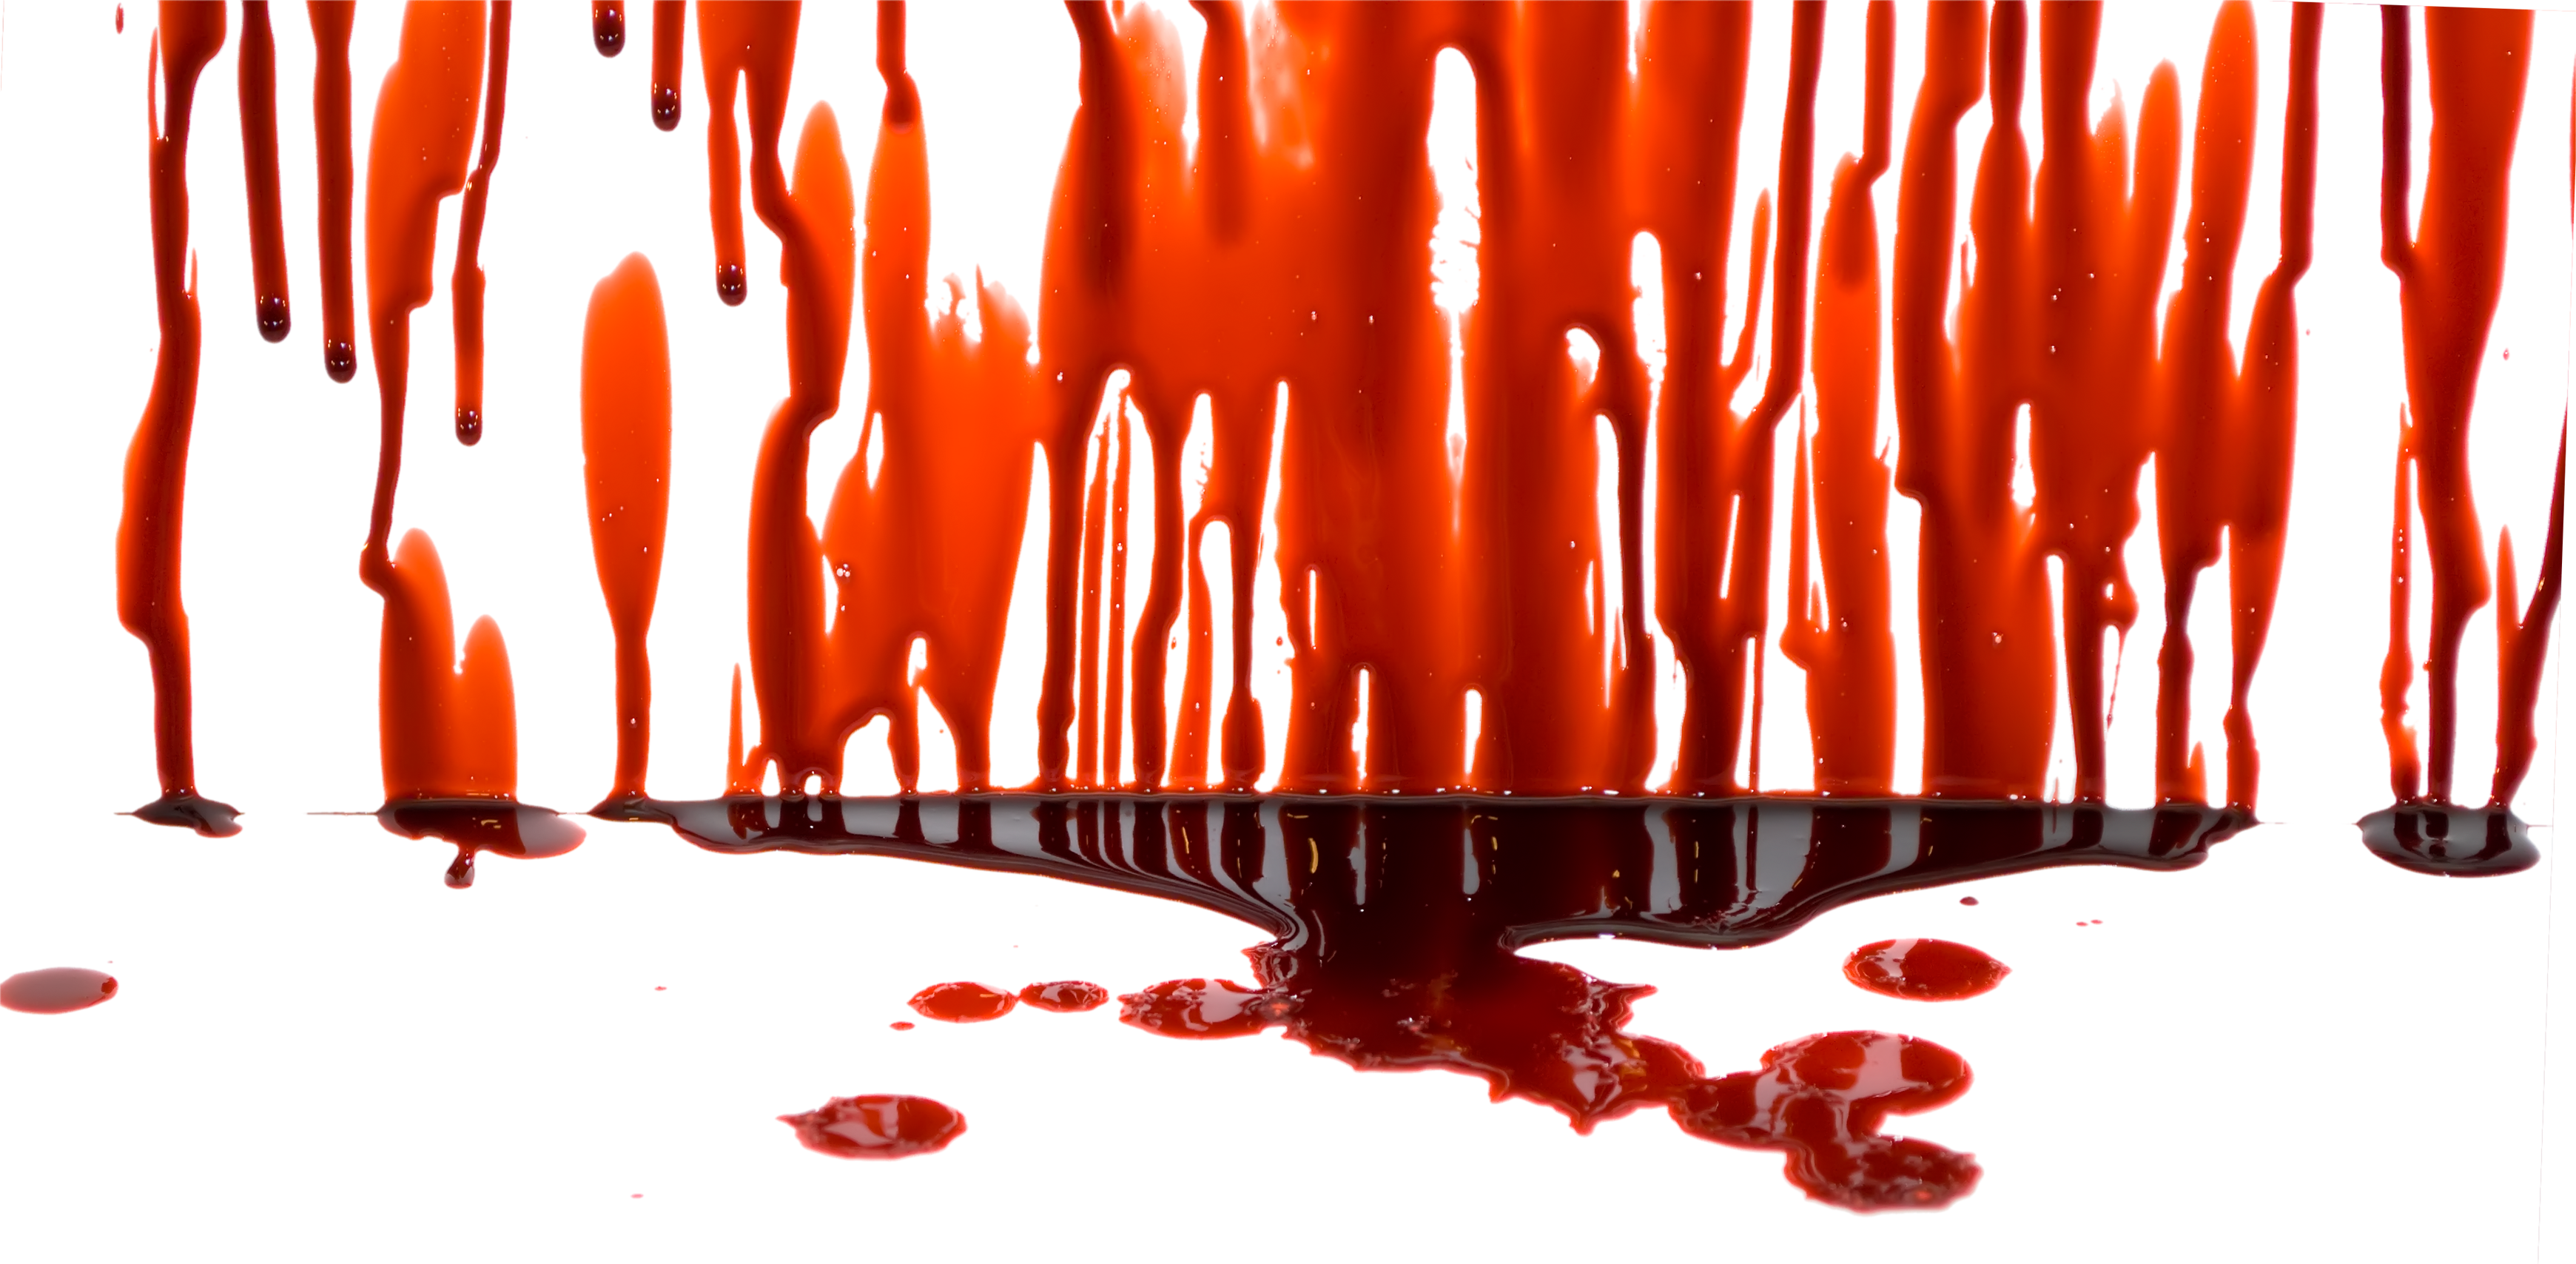 Blood dripping png. Splatter sixty one isolated